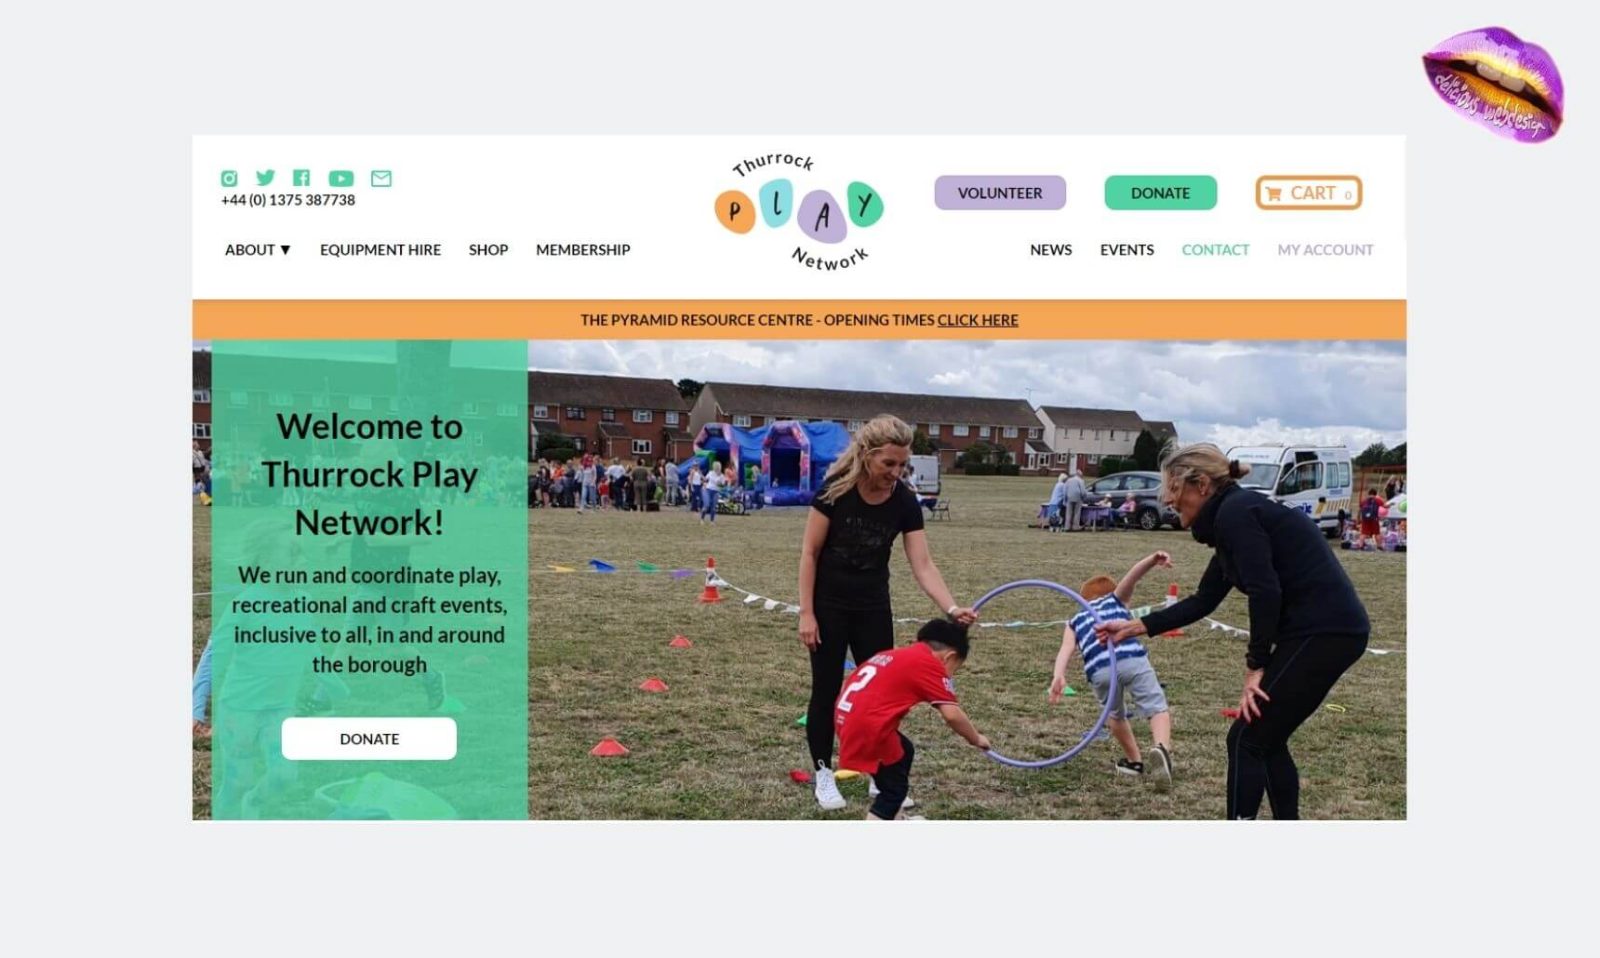 Thurrock Play Network